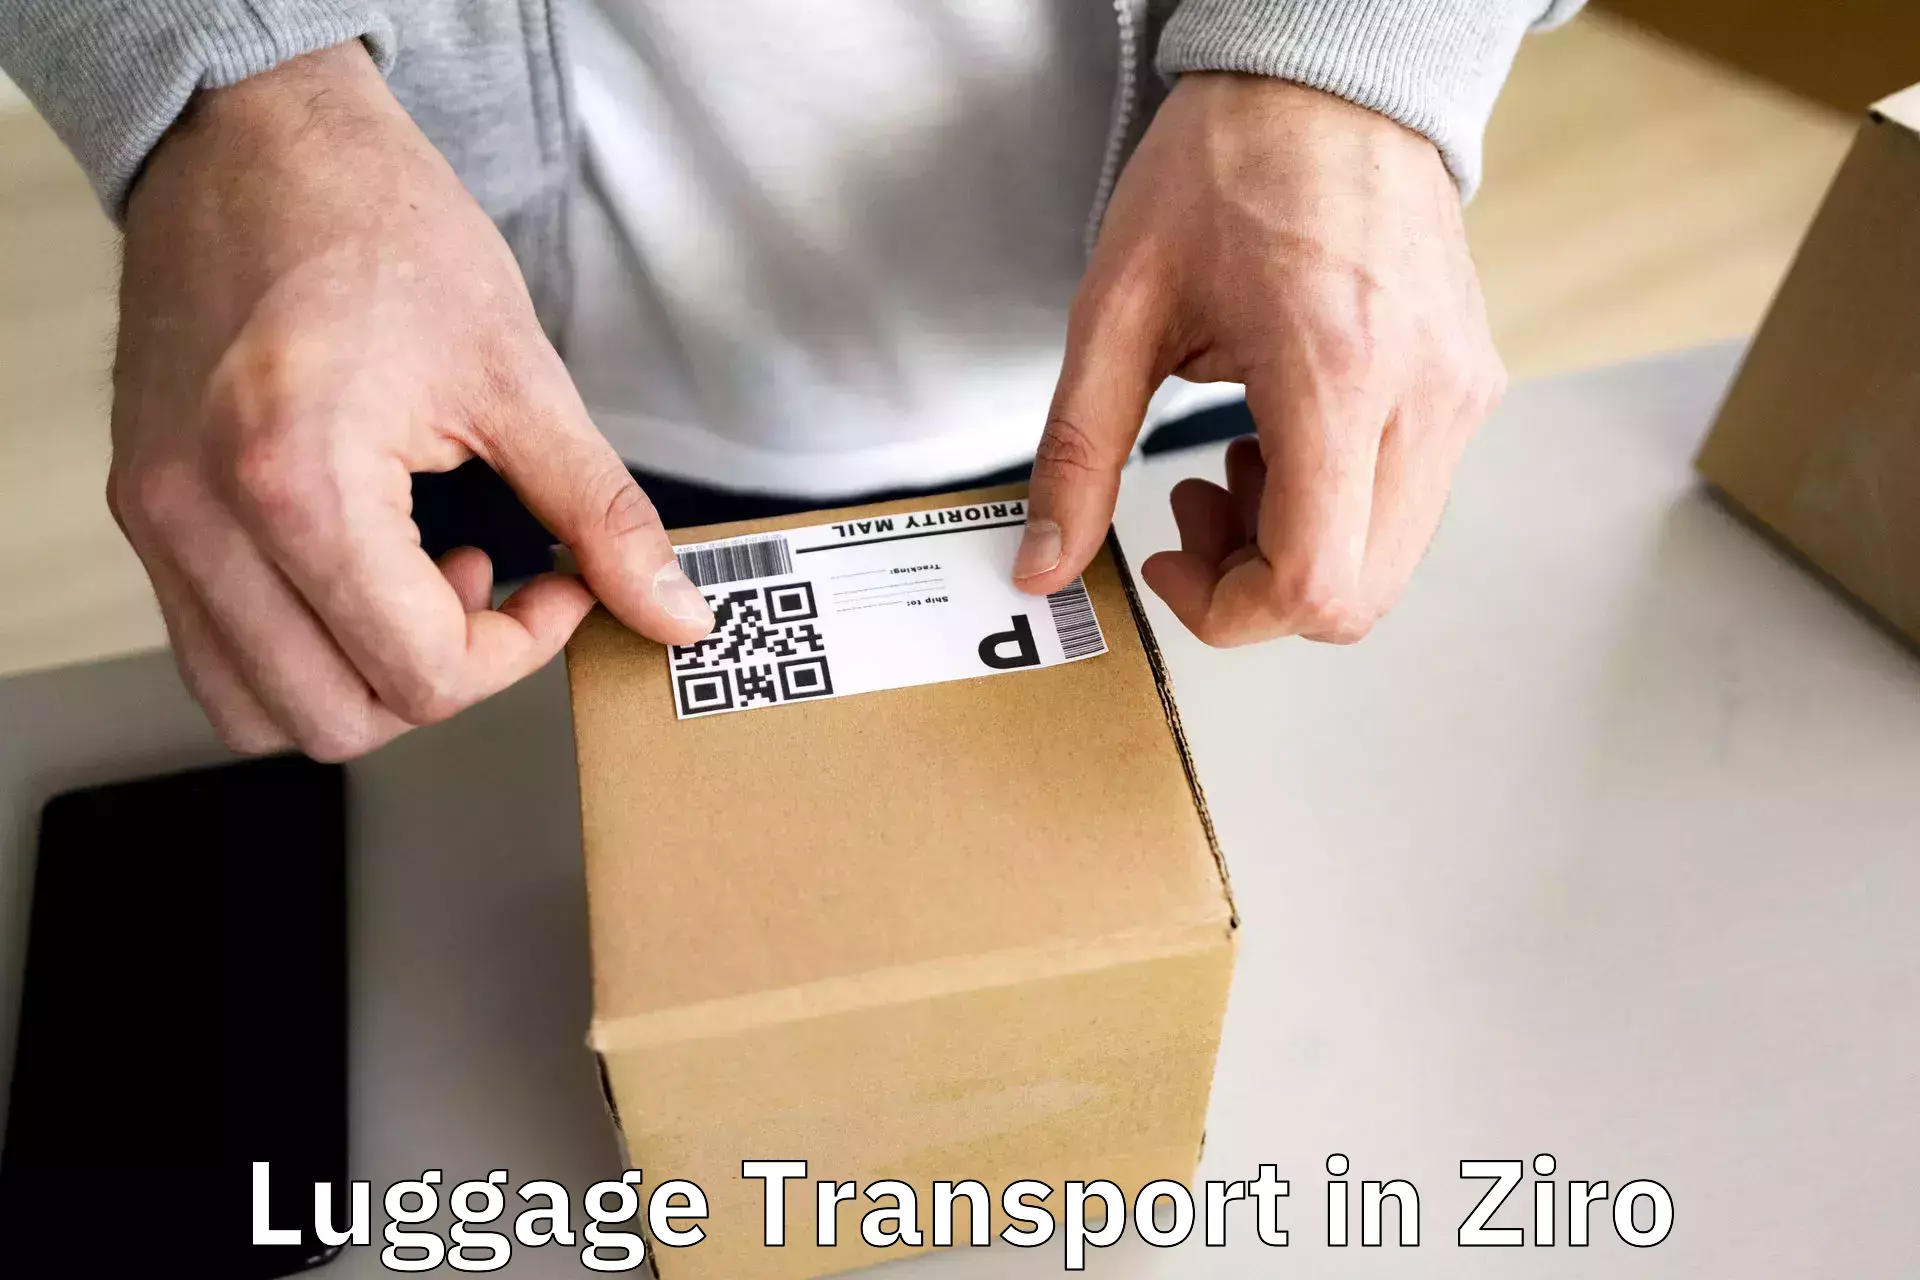 Luggage delivery operations in Ziro